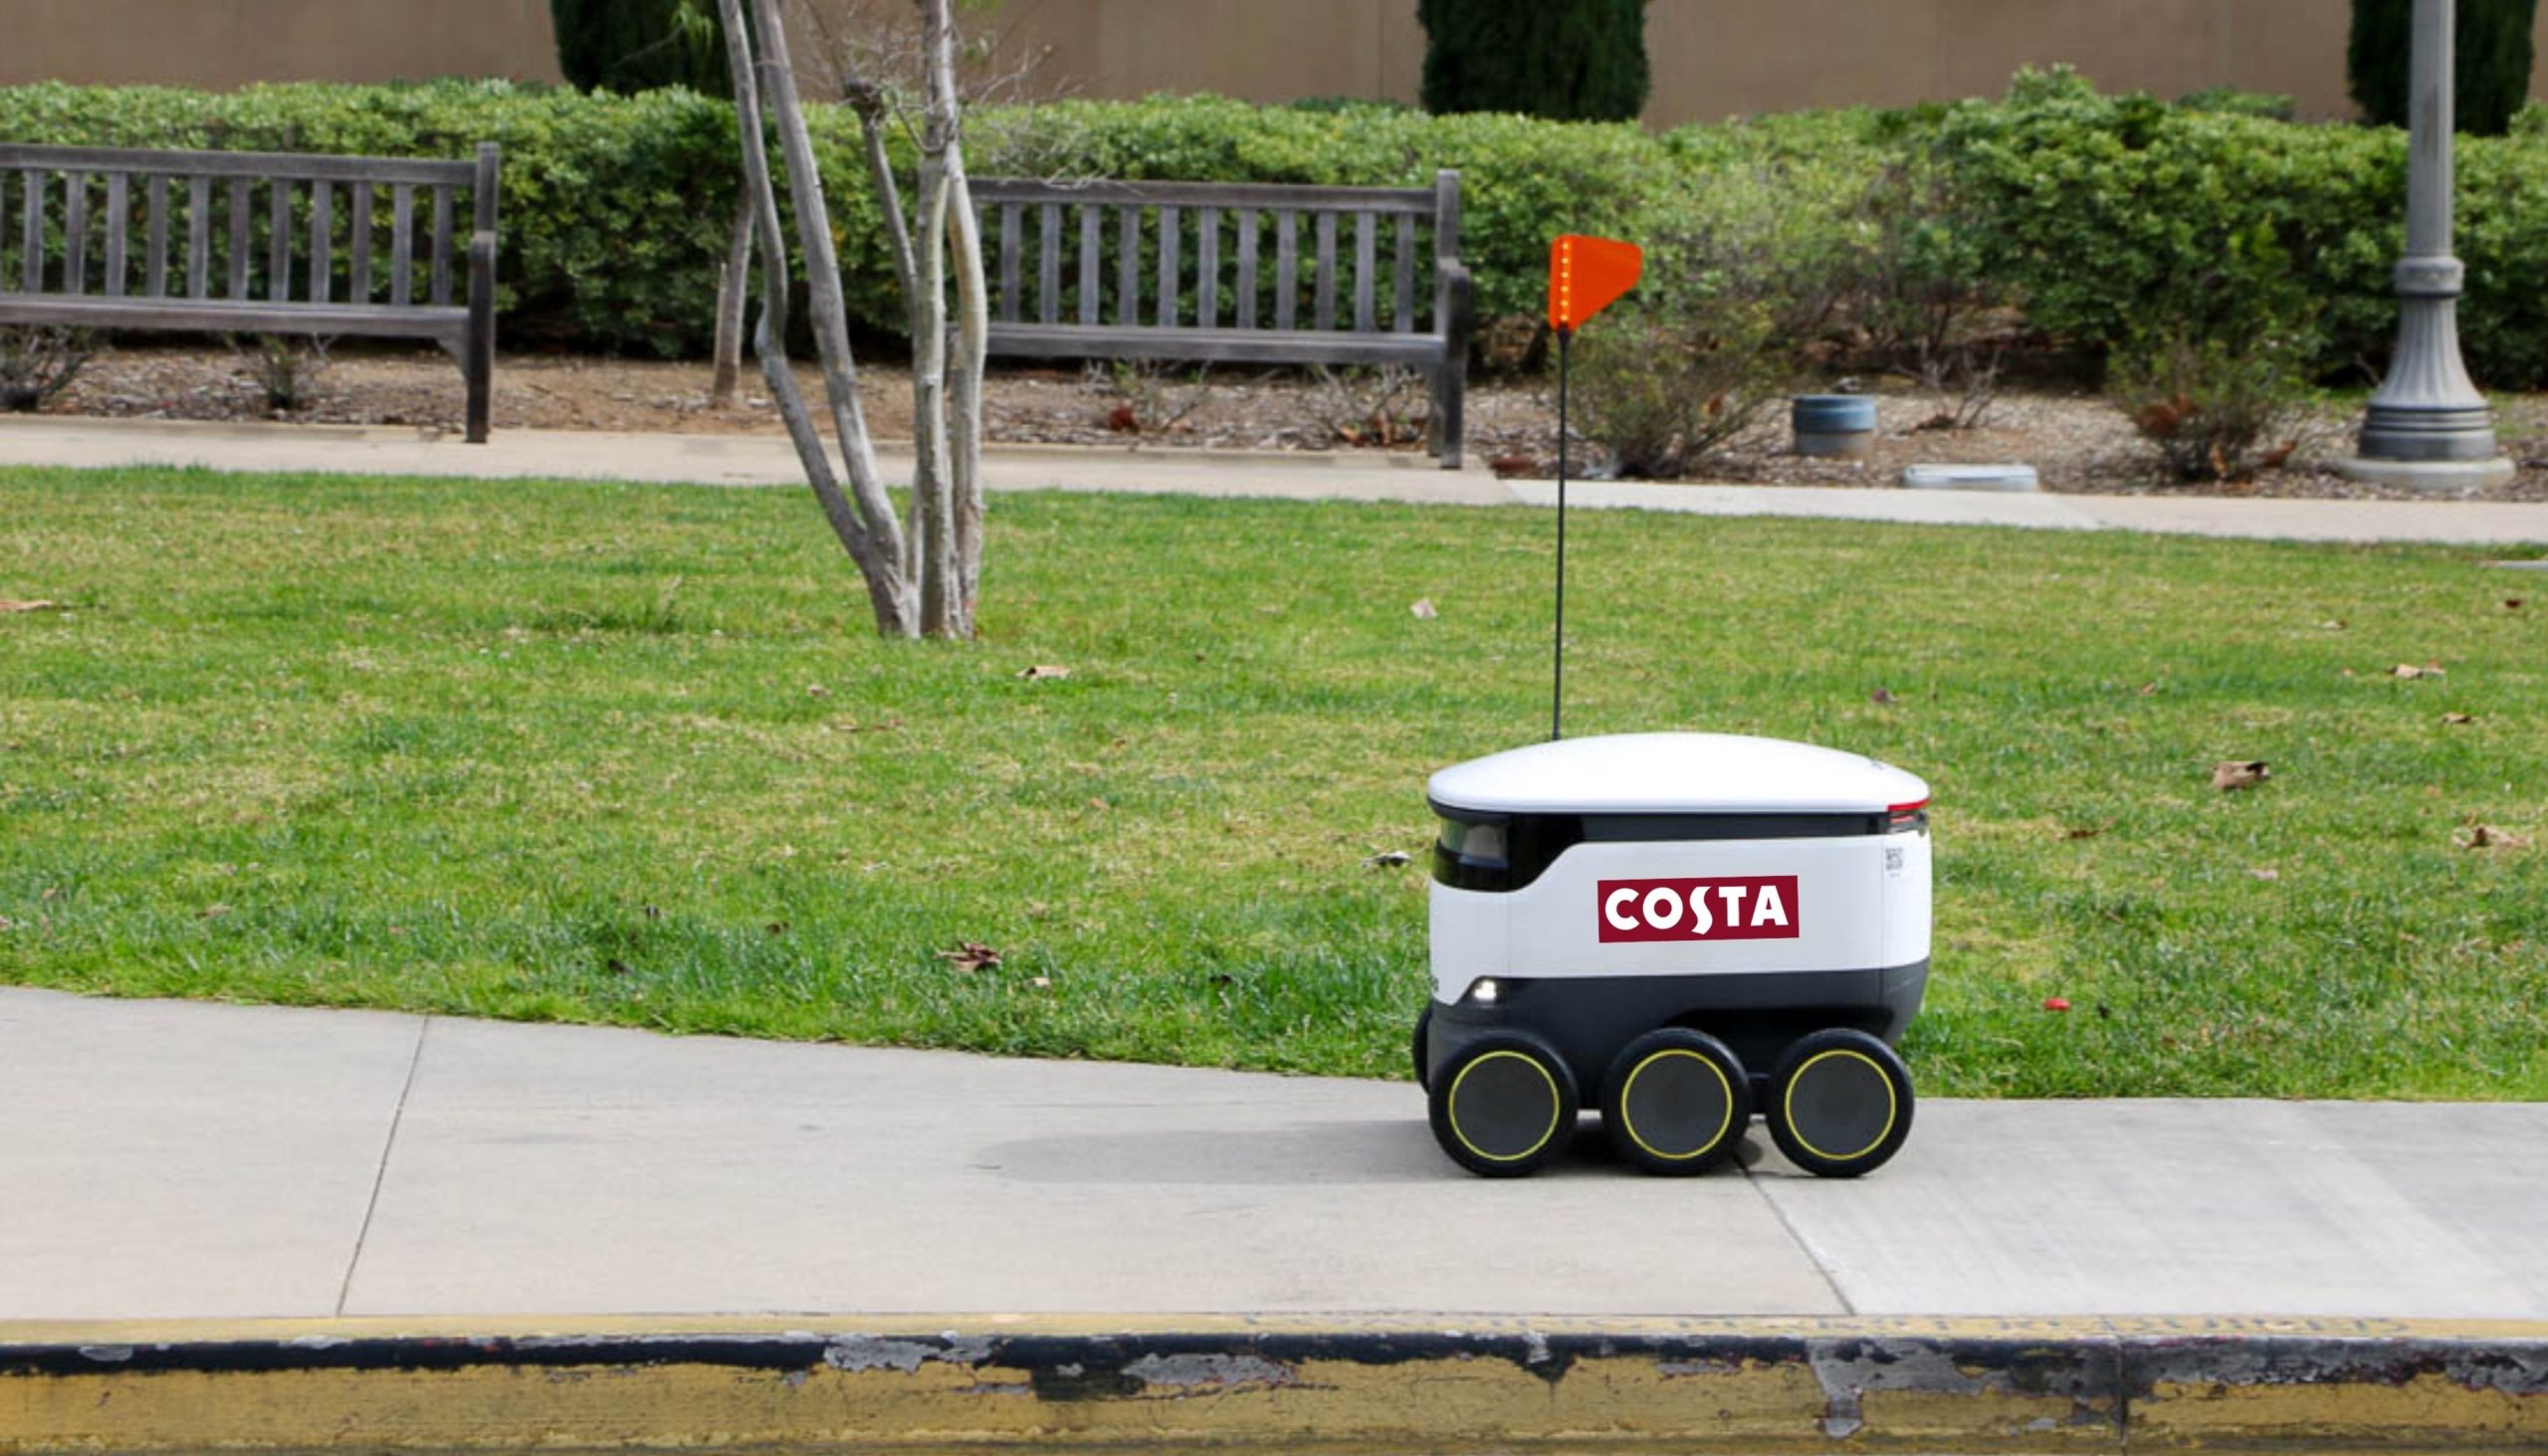 CostaBot Alert:  You can now get a Costa Coffee delivery by Starship Robot